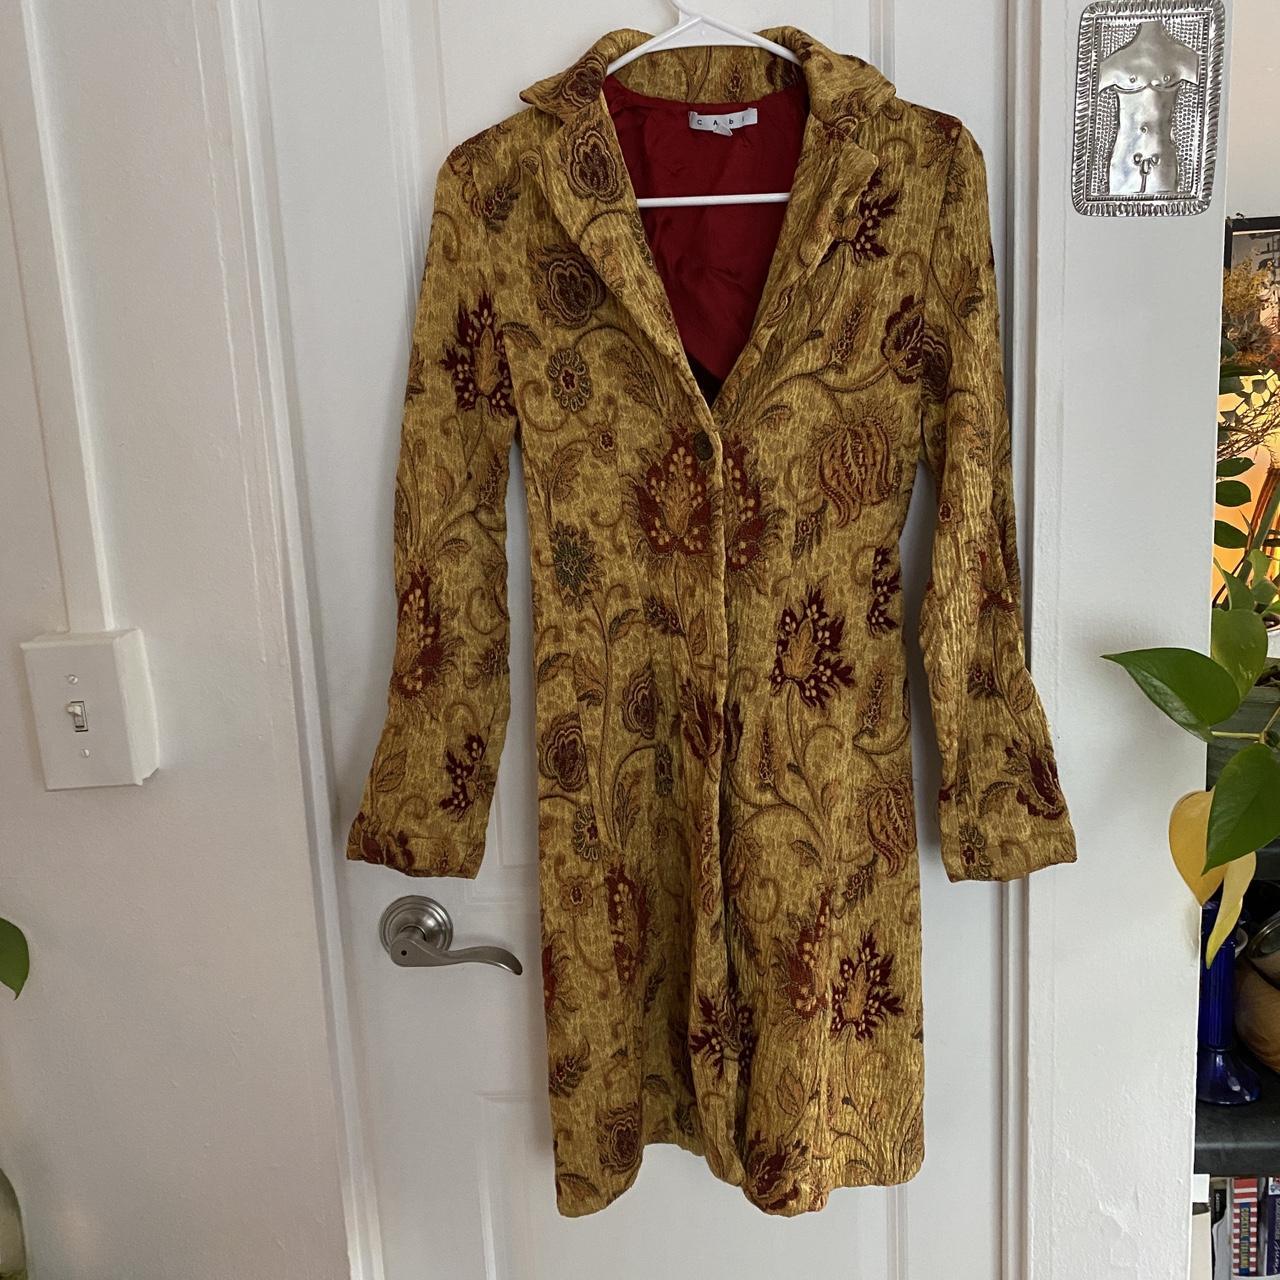 Vintage Cabi 70’s style coat - fits like a small,... - Depop